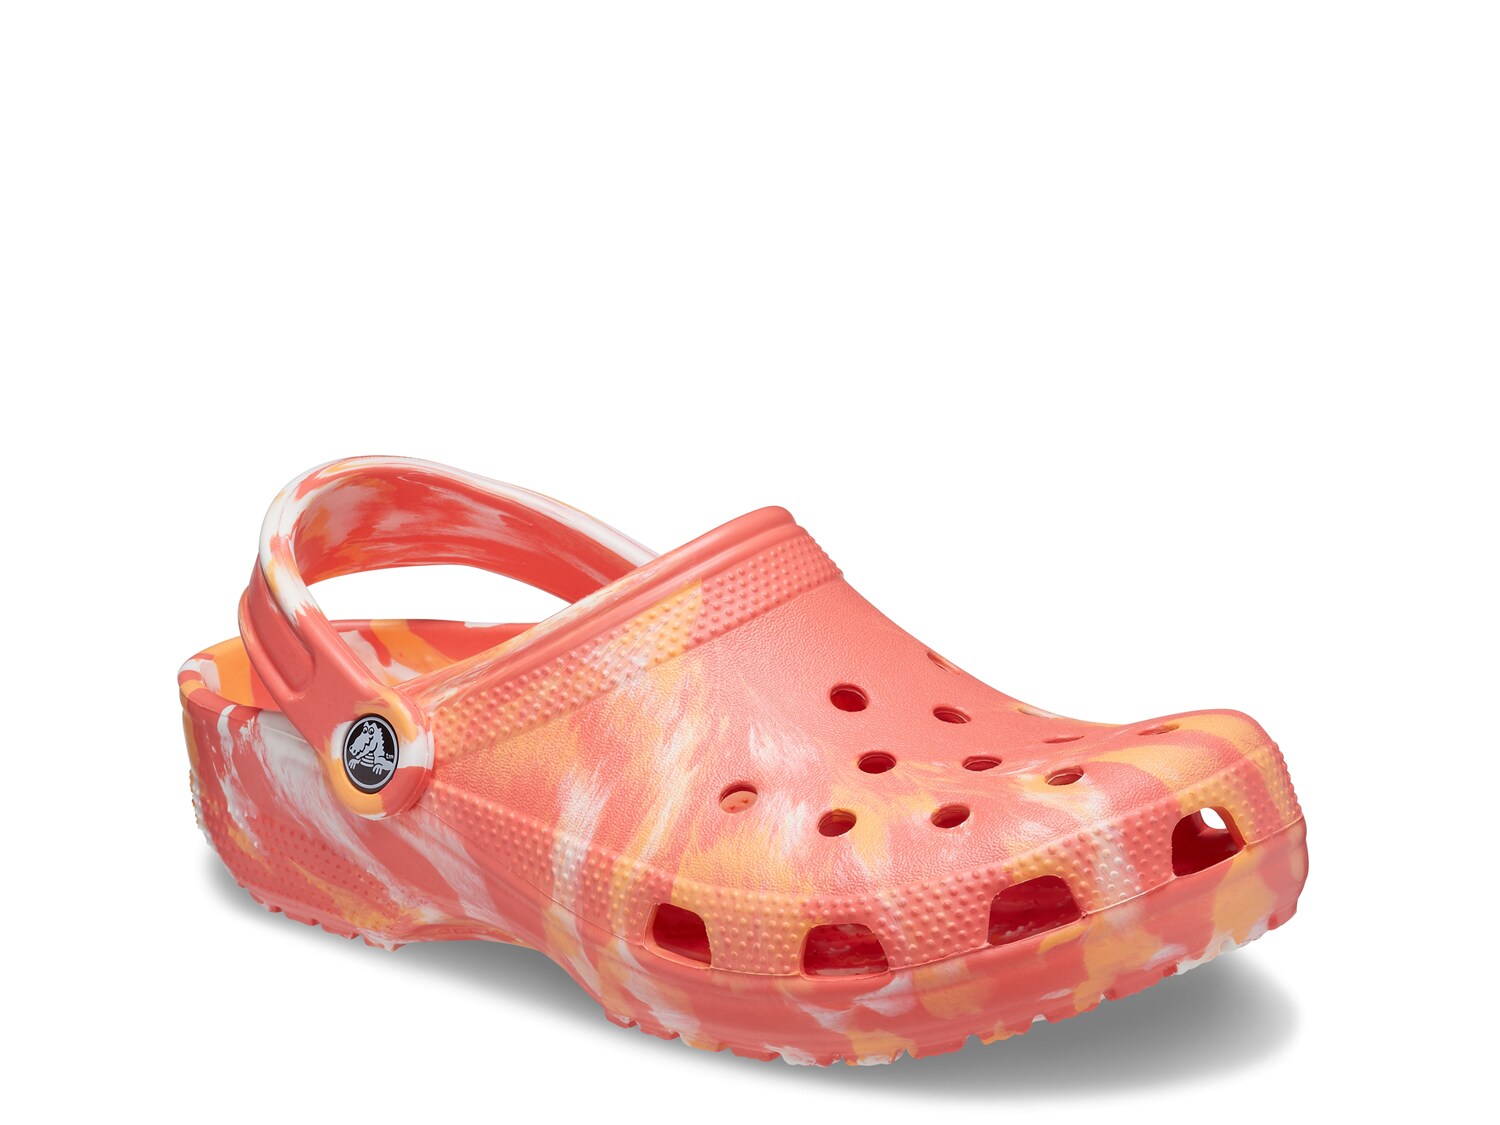 Where Can You Buy Crocs For Cheap